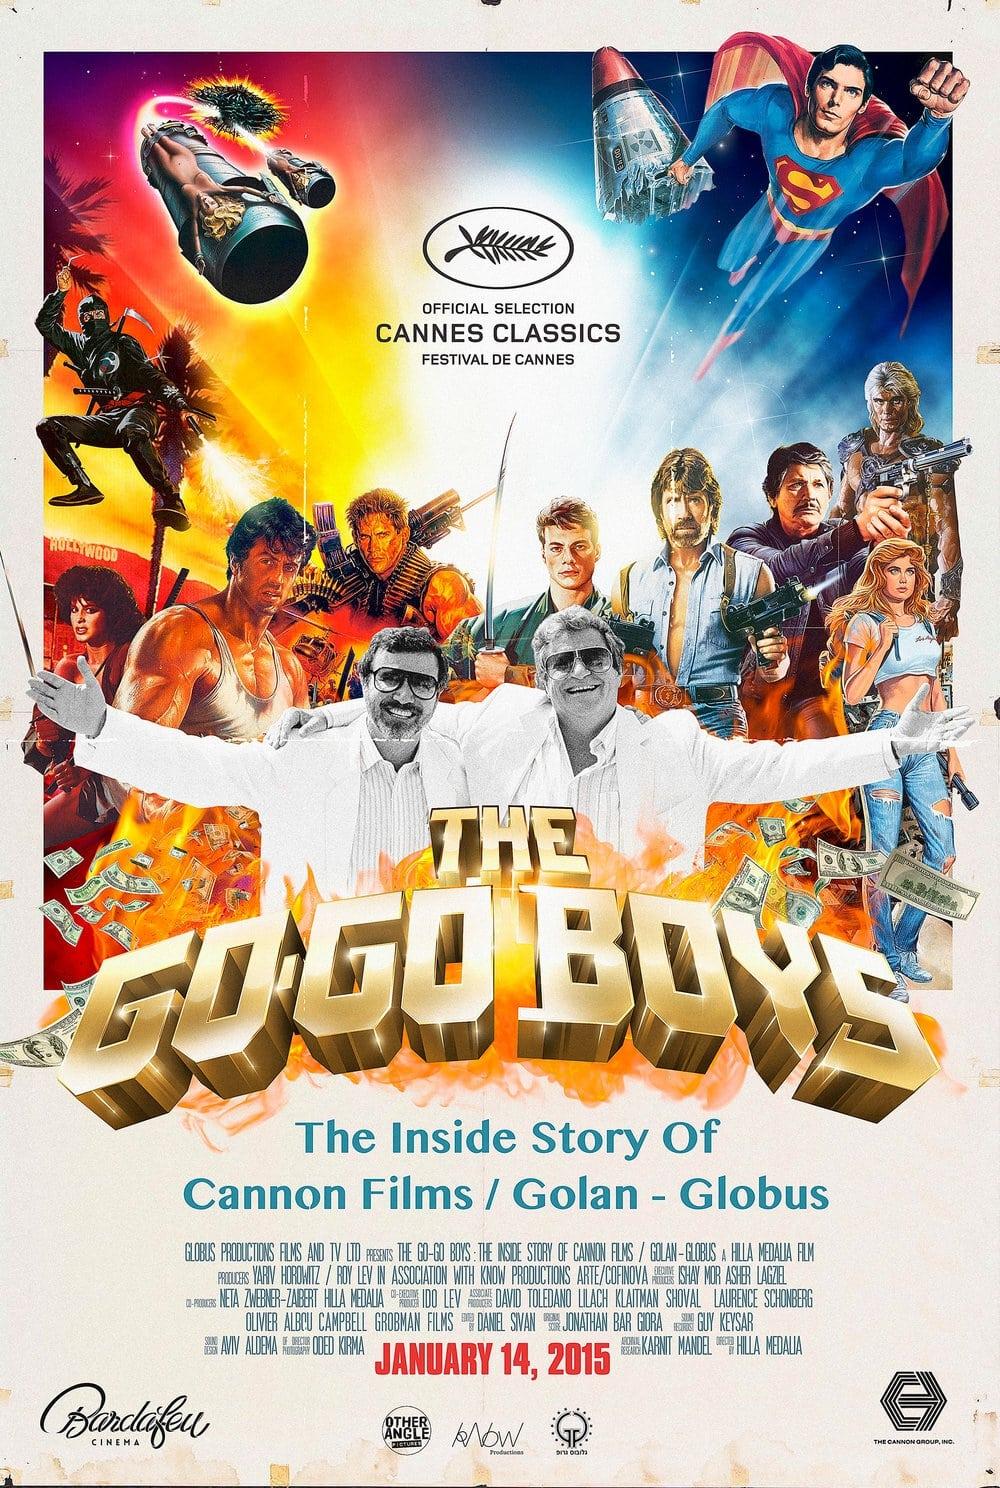 The Go-Go Boys: The Inside Story of Cannon Films poster